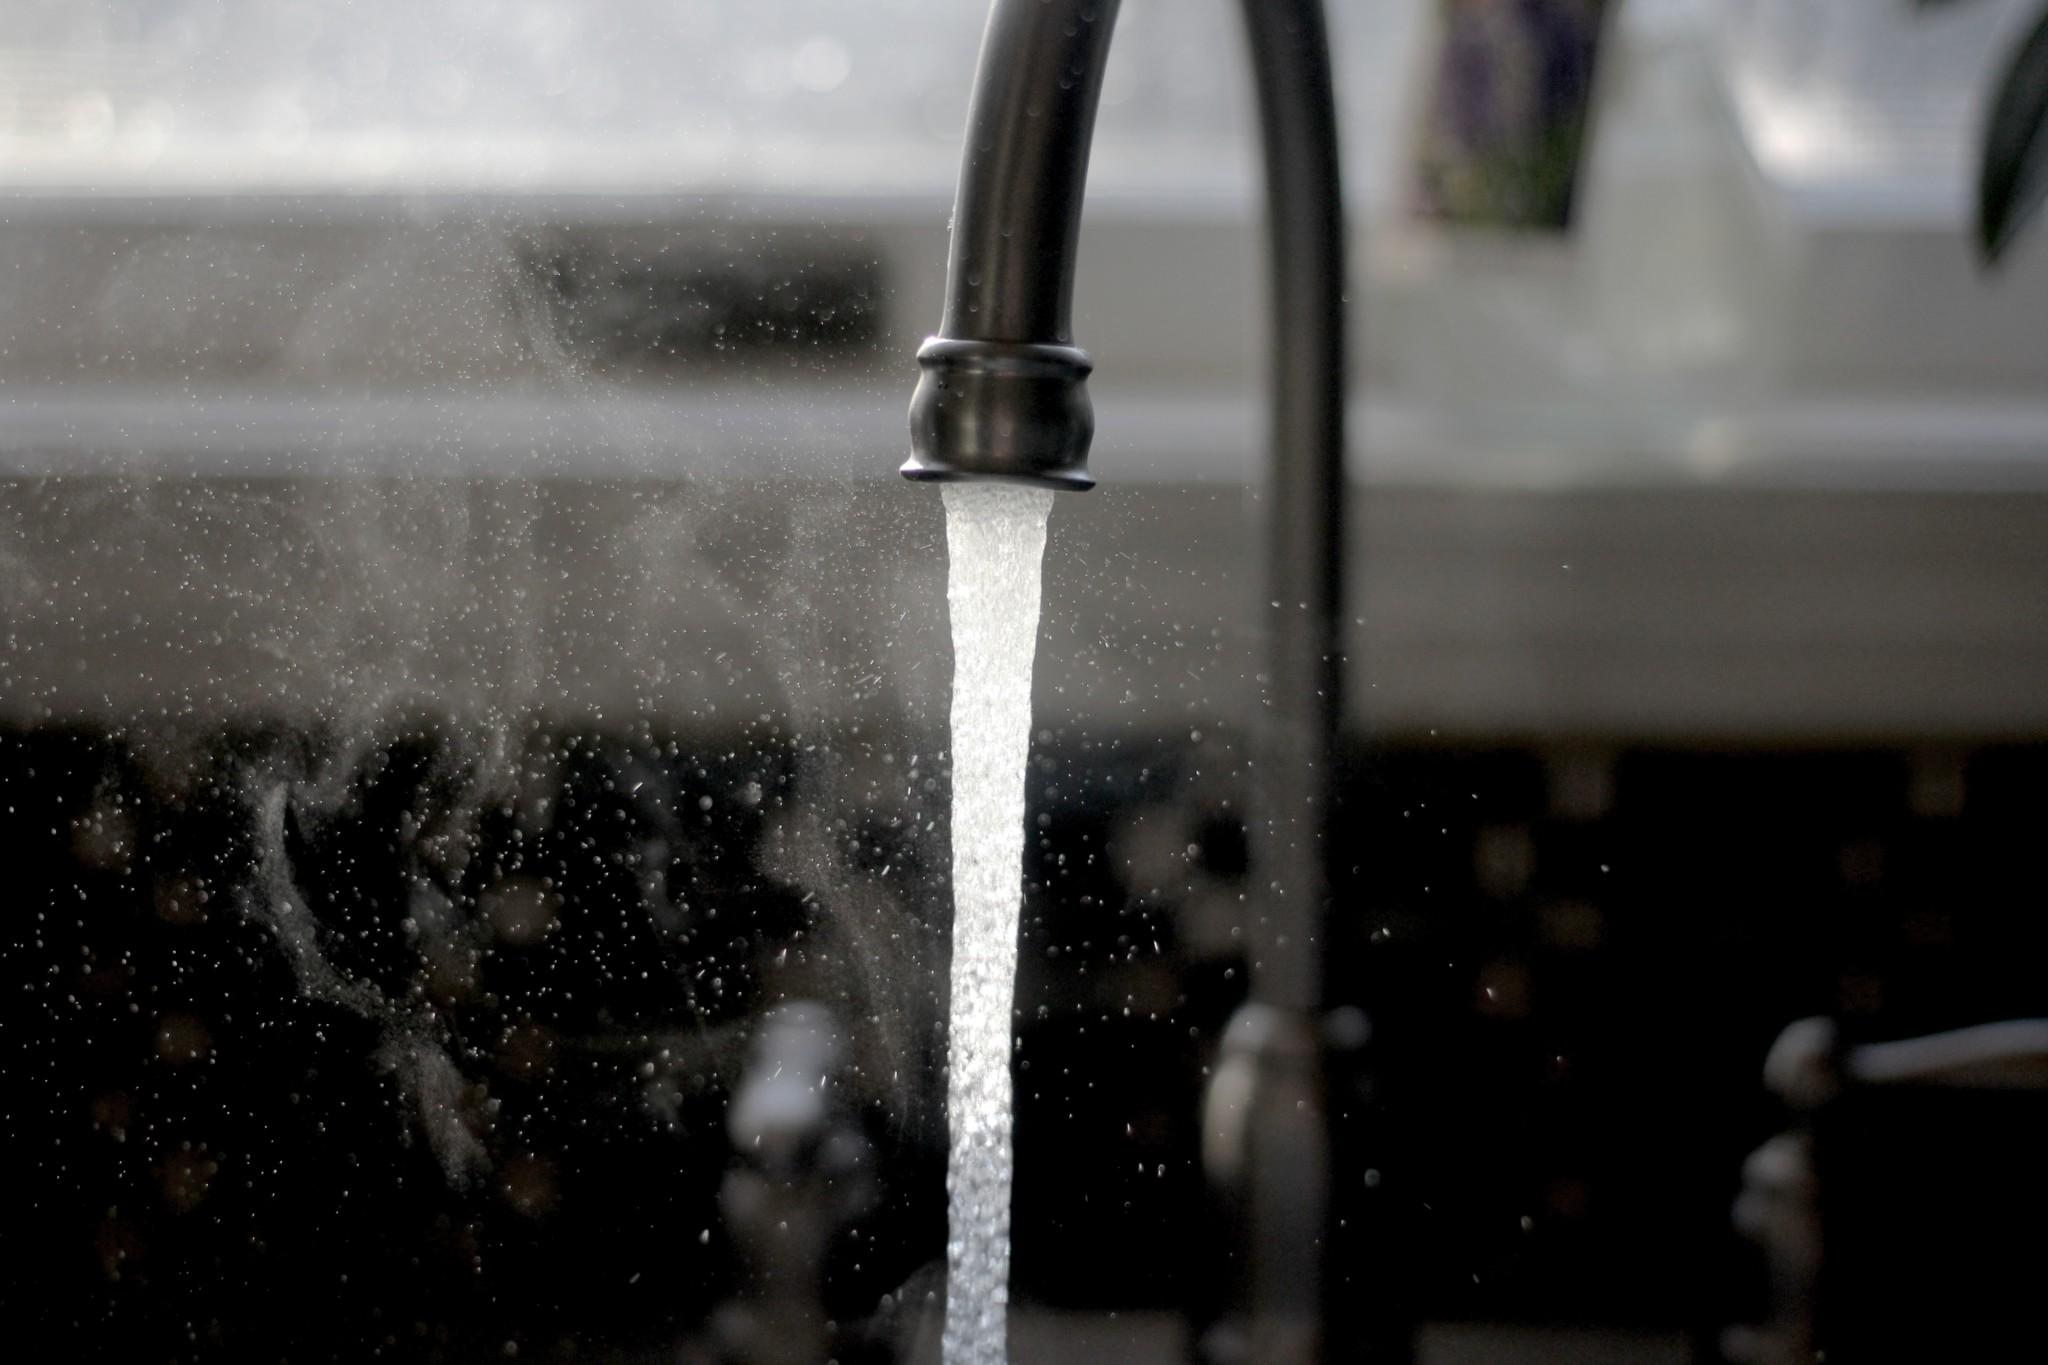 ATTACHMENT DETAILS tap-water-faucet-streaming-scaled.jpg March 3, 2020159 KB 2048 by